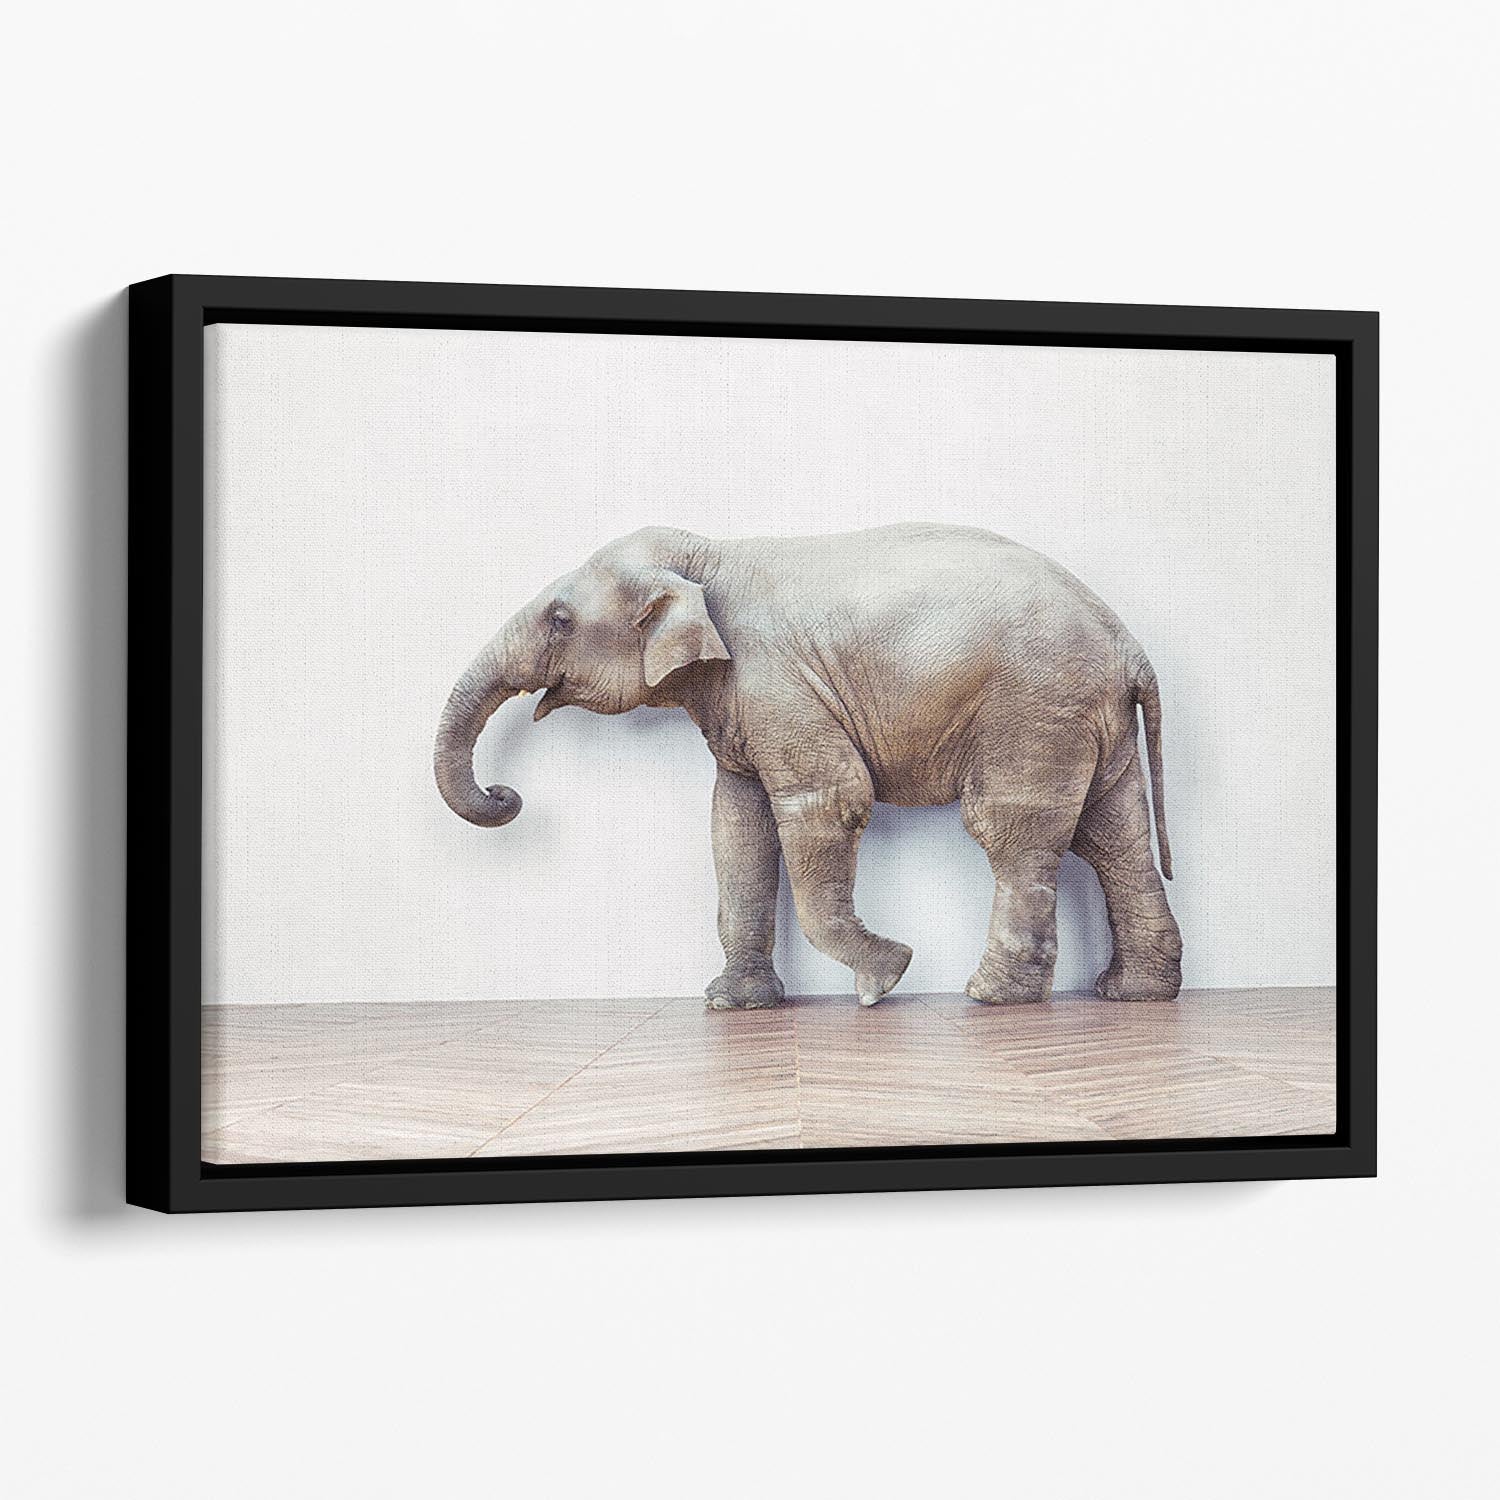 The elephant calm in the room near white wall Floating Framed Canvas - Canvas Art Rocks - 1